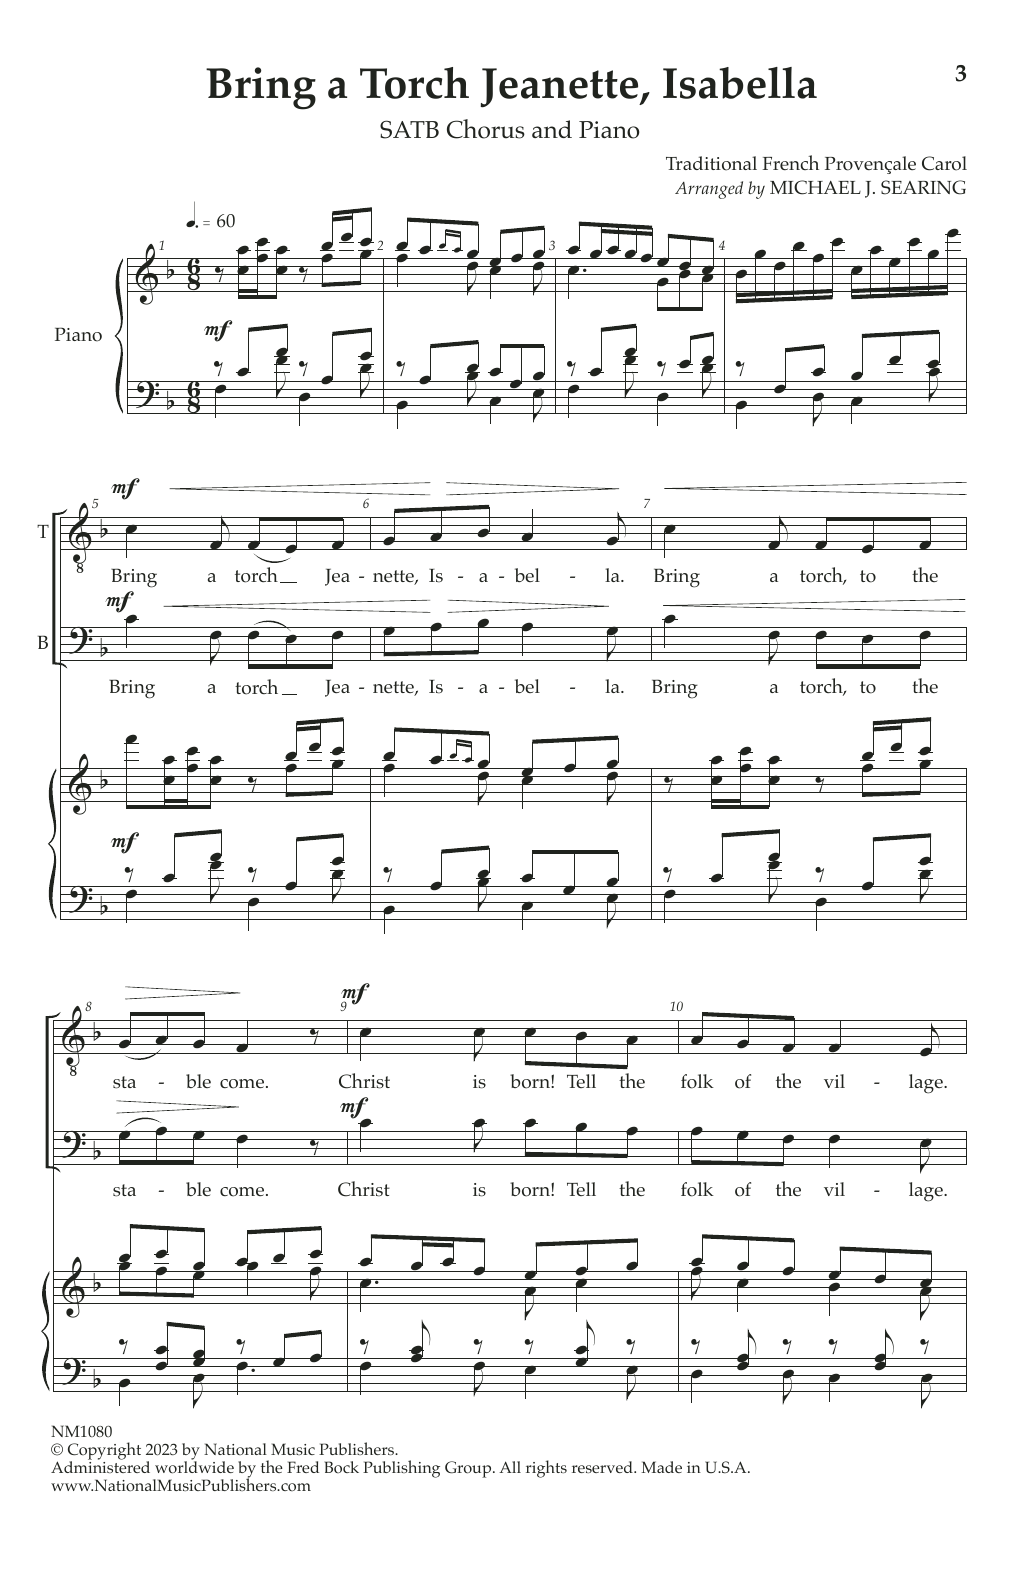 Traditional French Carol Bring a Torch, Jeanette, Isabella (arr. Michael J. Searing) sheet music notes and chords arranged for SATB Choir